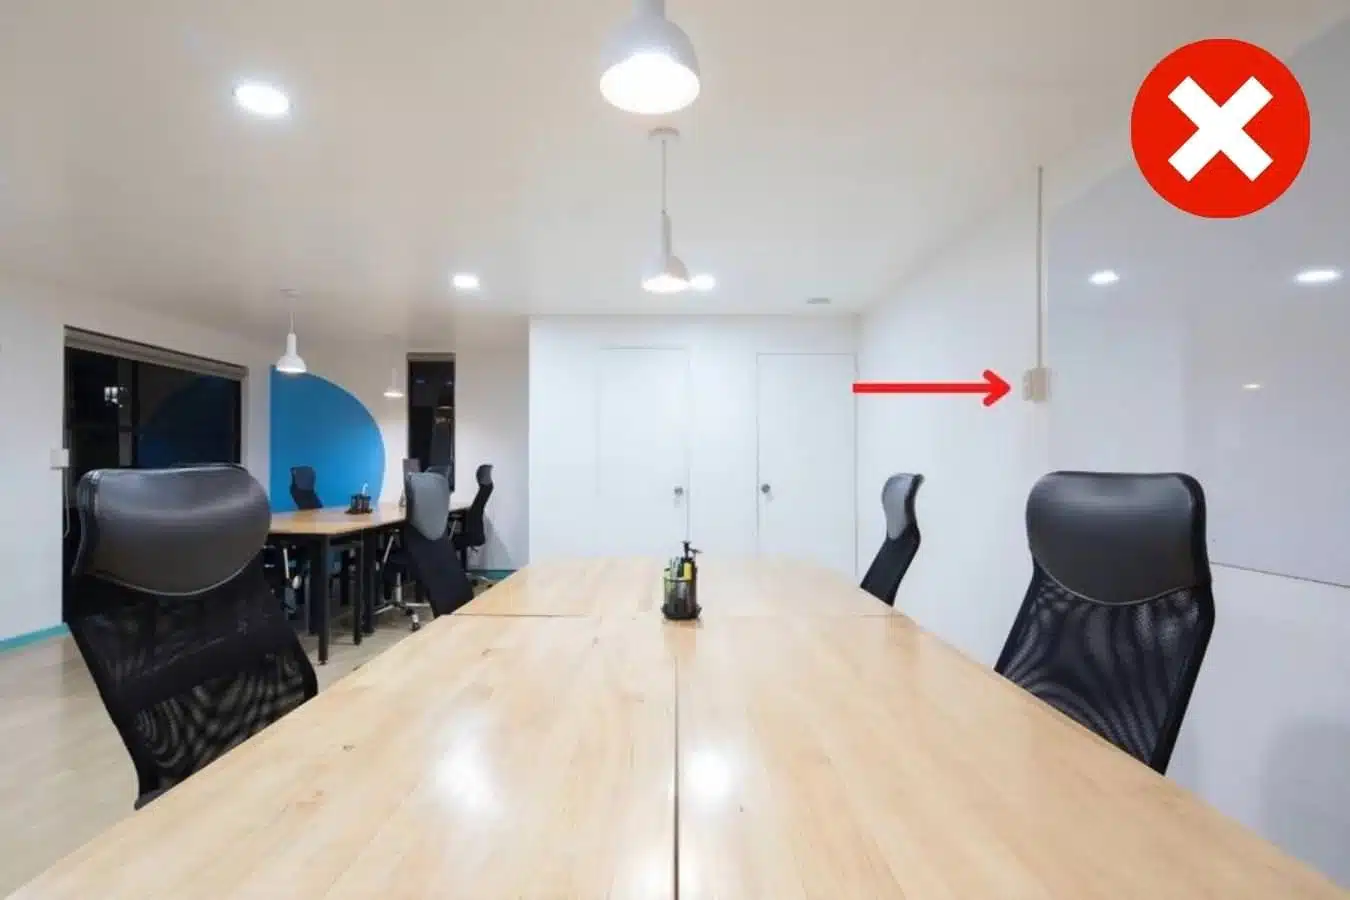 Image of the conference room with automatic light sensors